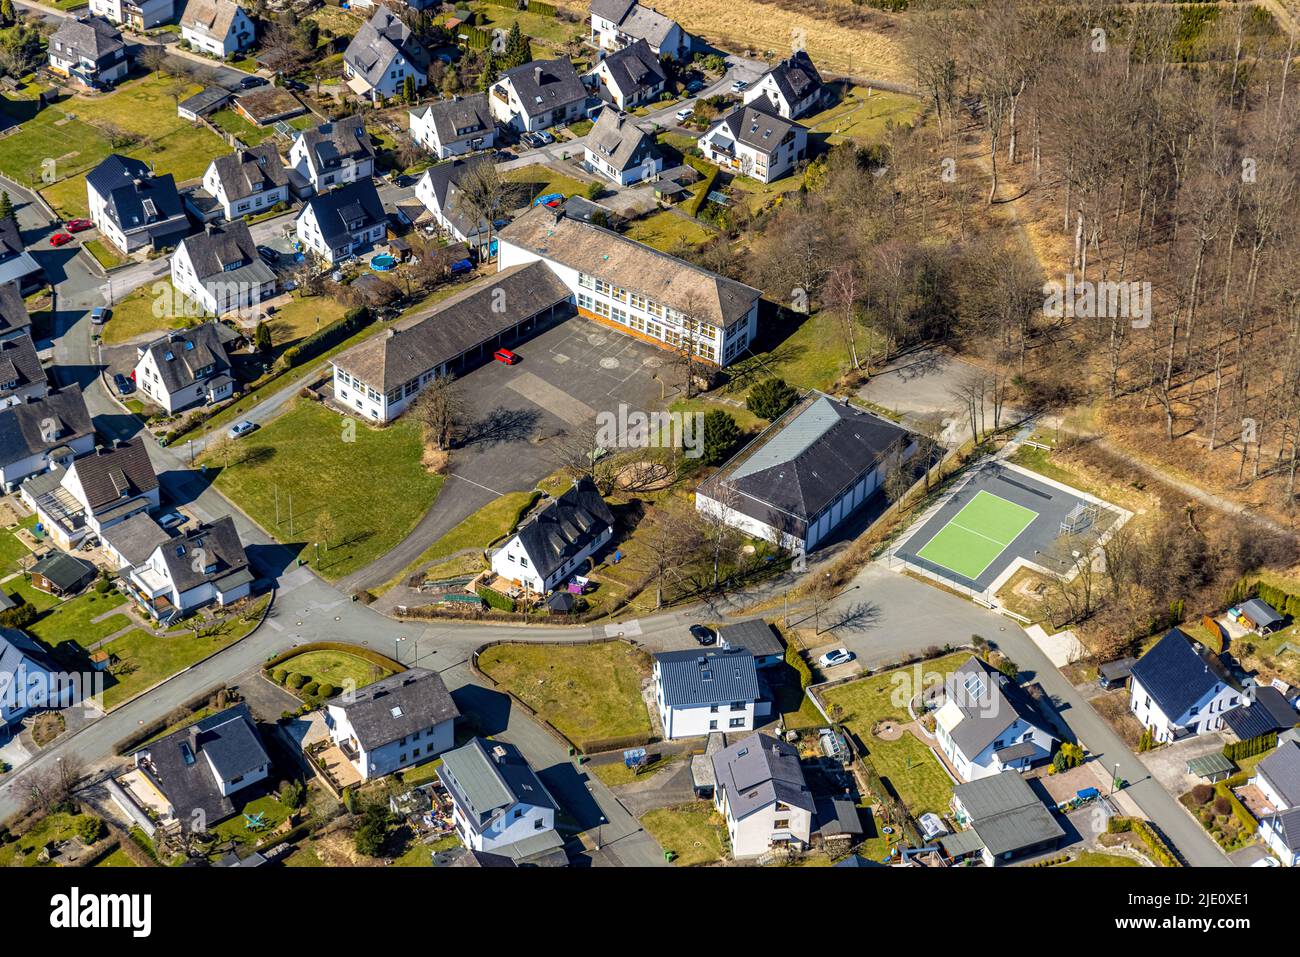 Aerial view, Anne-Frank-School with gymnasium and playground, Ostwig, Bestwig, Sauerland, North Rhine-Westphalia, Germany, education, educational inst Stock Photo